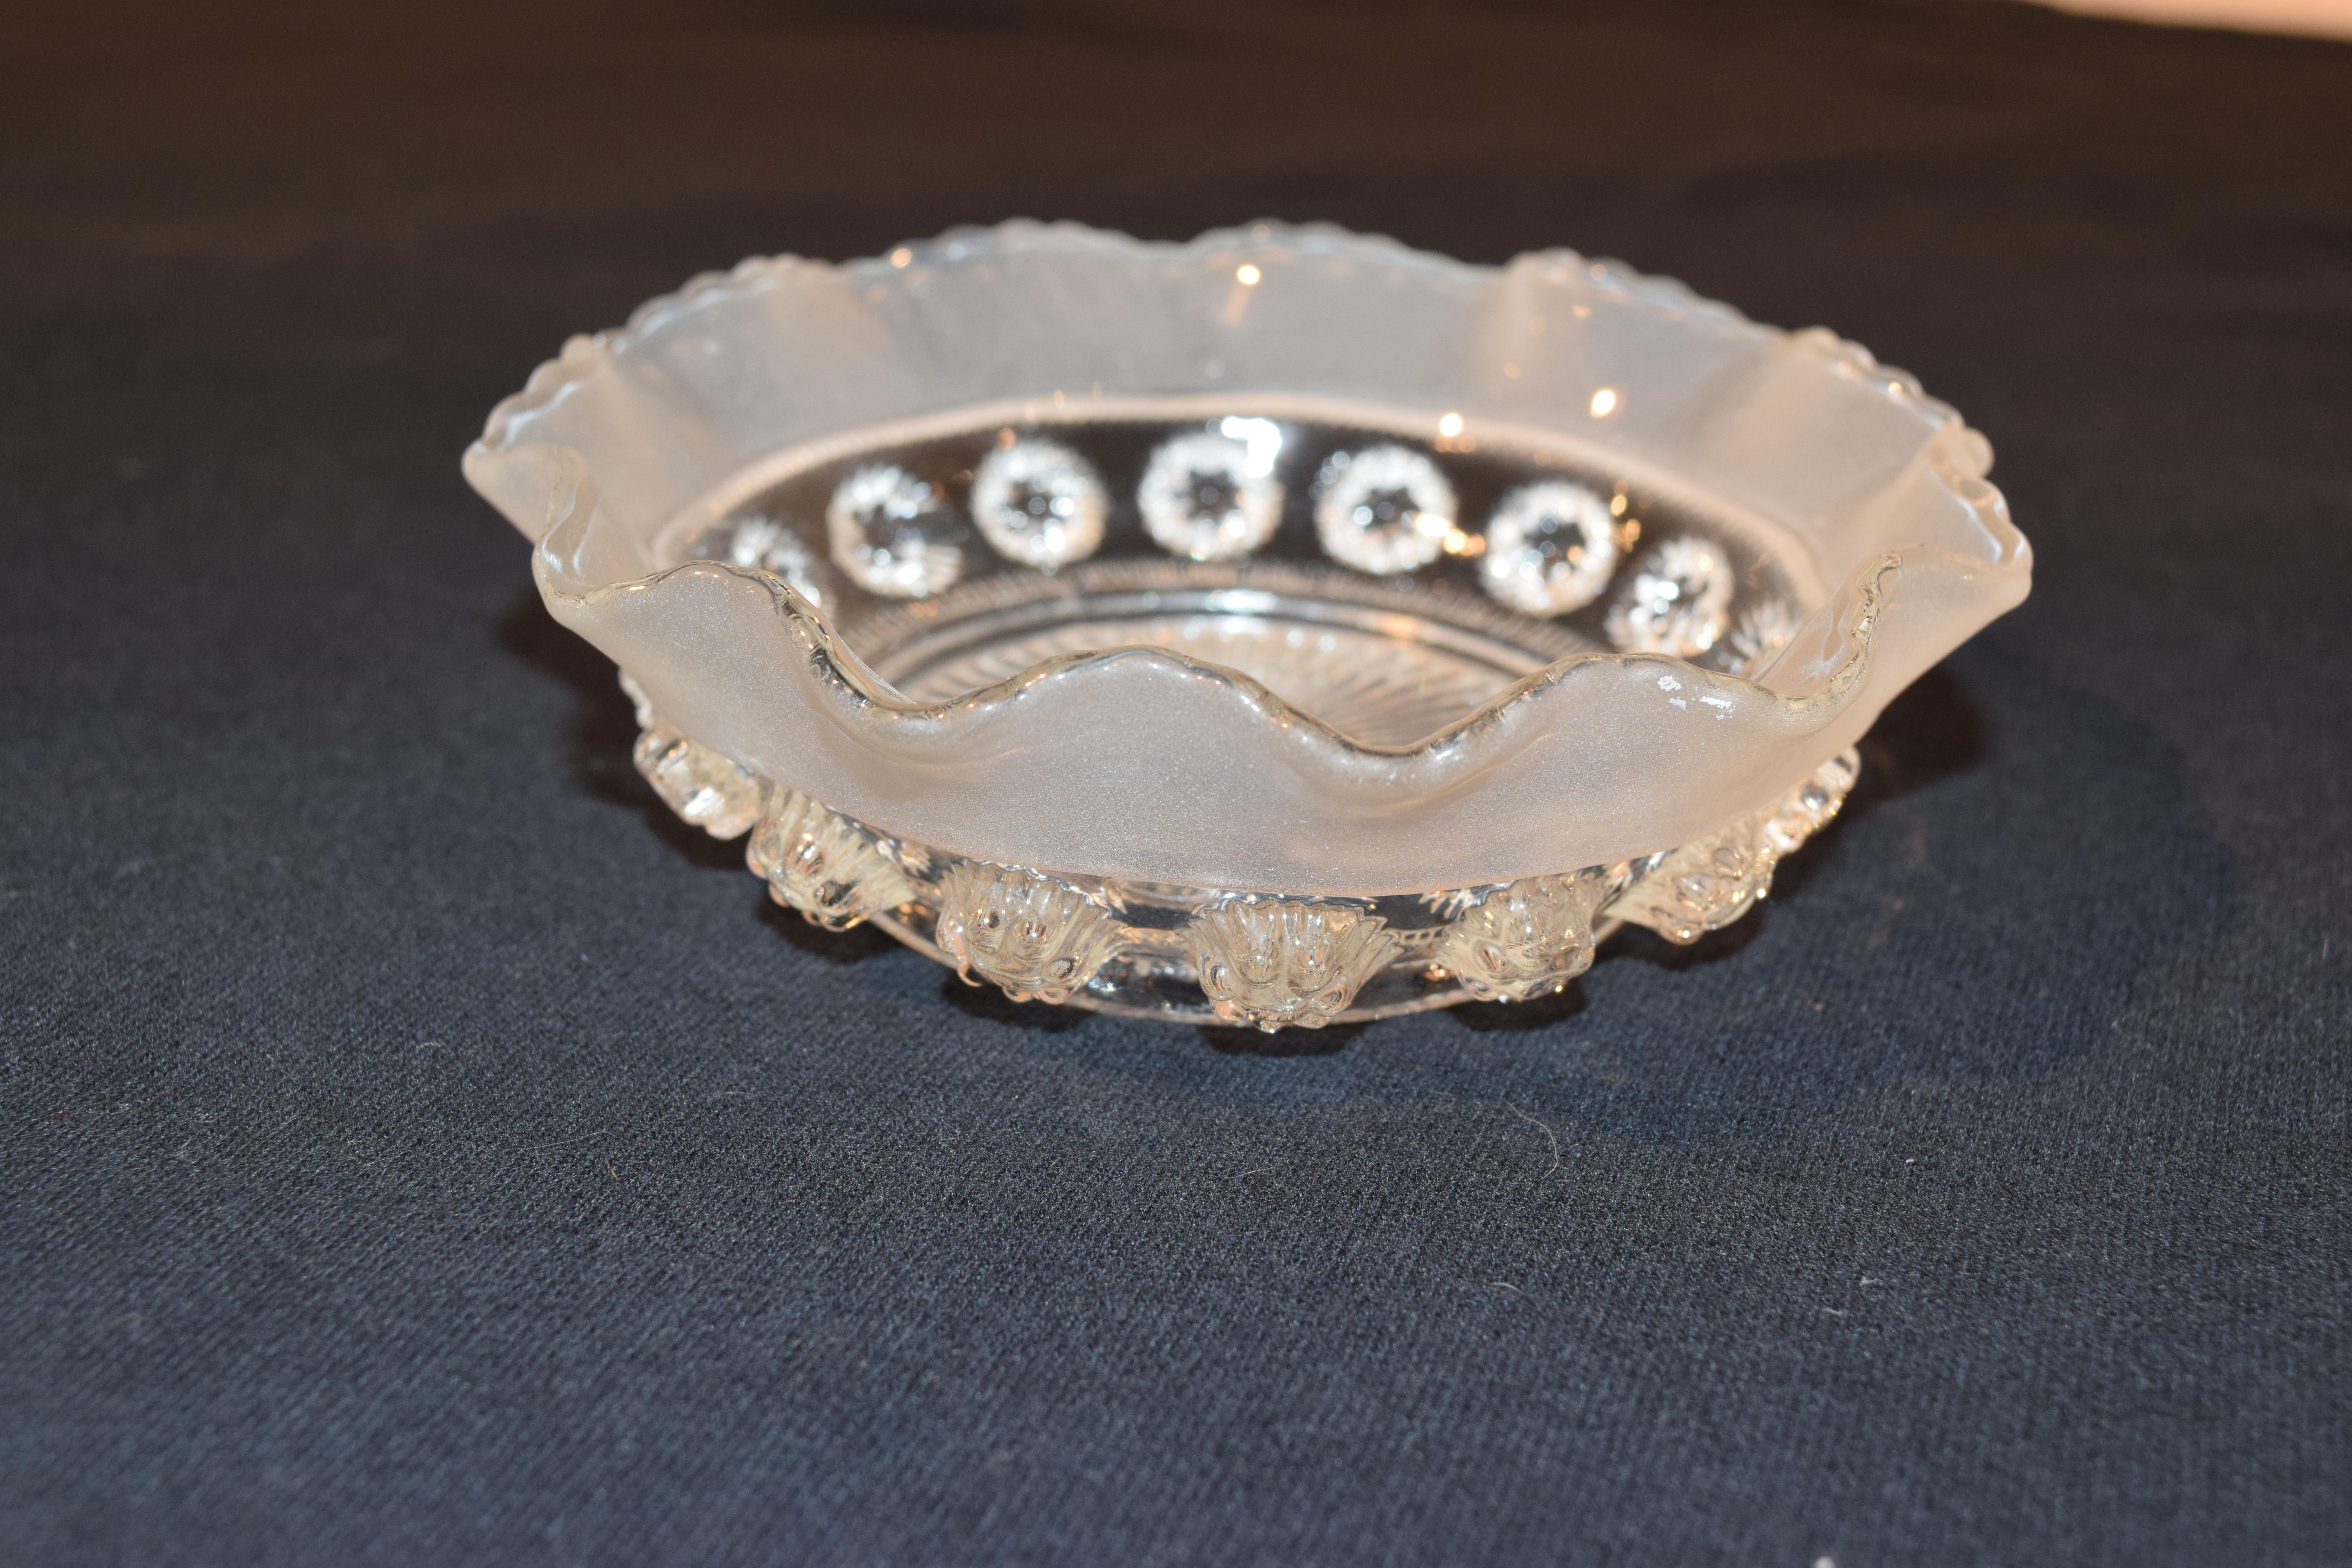 Late 19th century early American pressed glass small bowl with a lovely ruffled and scalloped edge with a starburst pattern in the center and applied glass buttons around the sides.